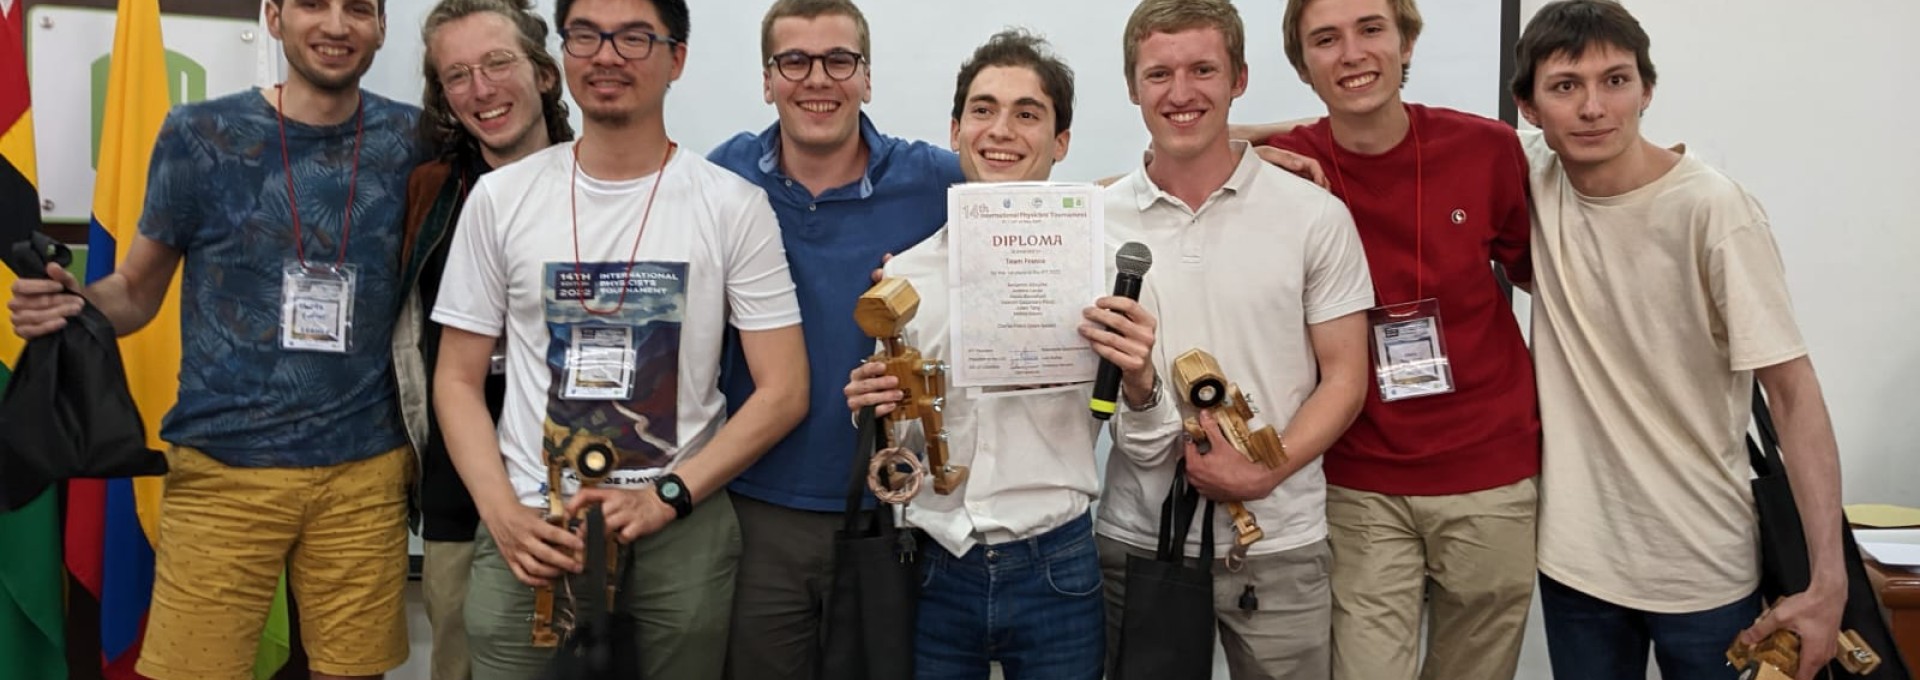 The French team wins the International Physicists’ Tournament 2022